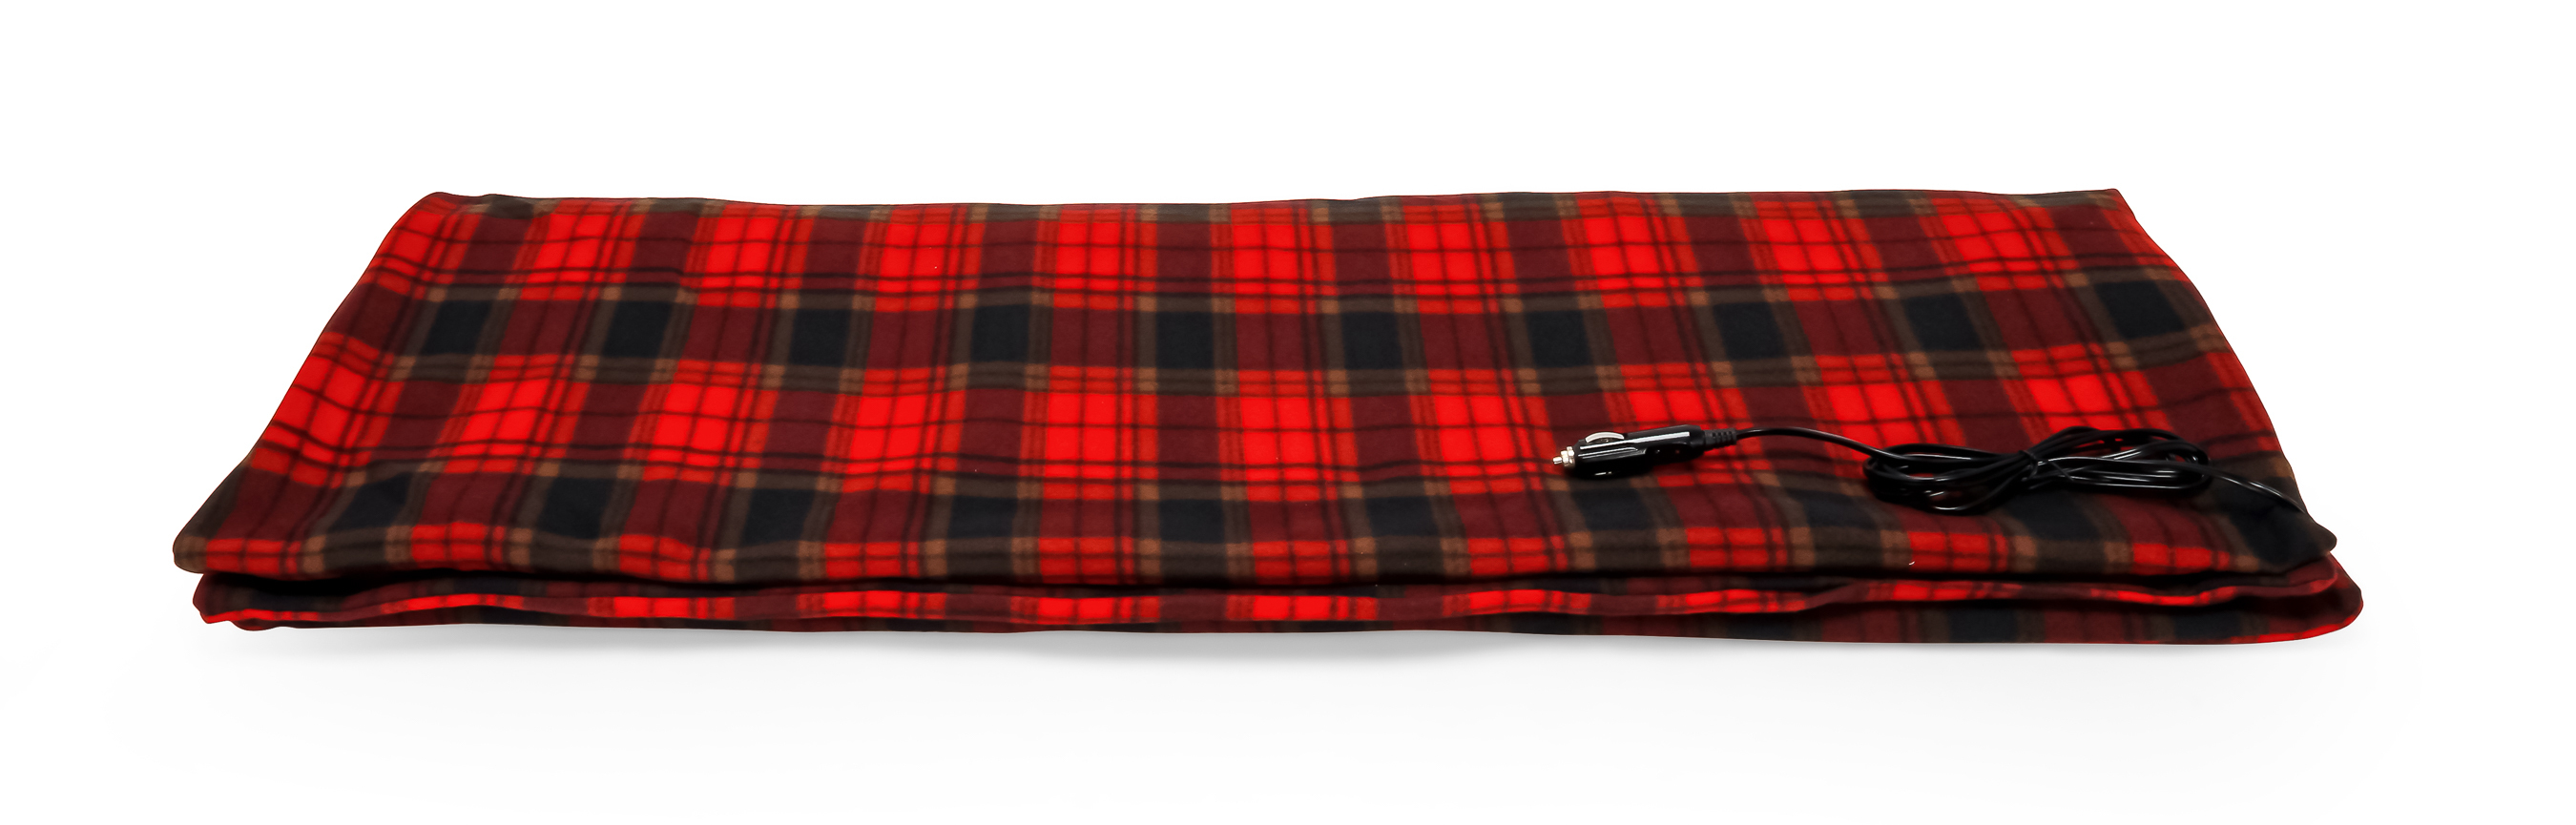 Camco Heated Blanket for RVs, Camping, Traveling, and More | Ideal for Cold Nights, Relieving Aches and Pain | 100% Polar Fleece | Red/Black Plaid (42804) - image 2 of 7